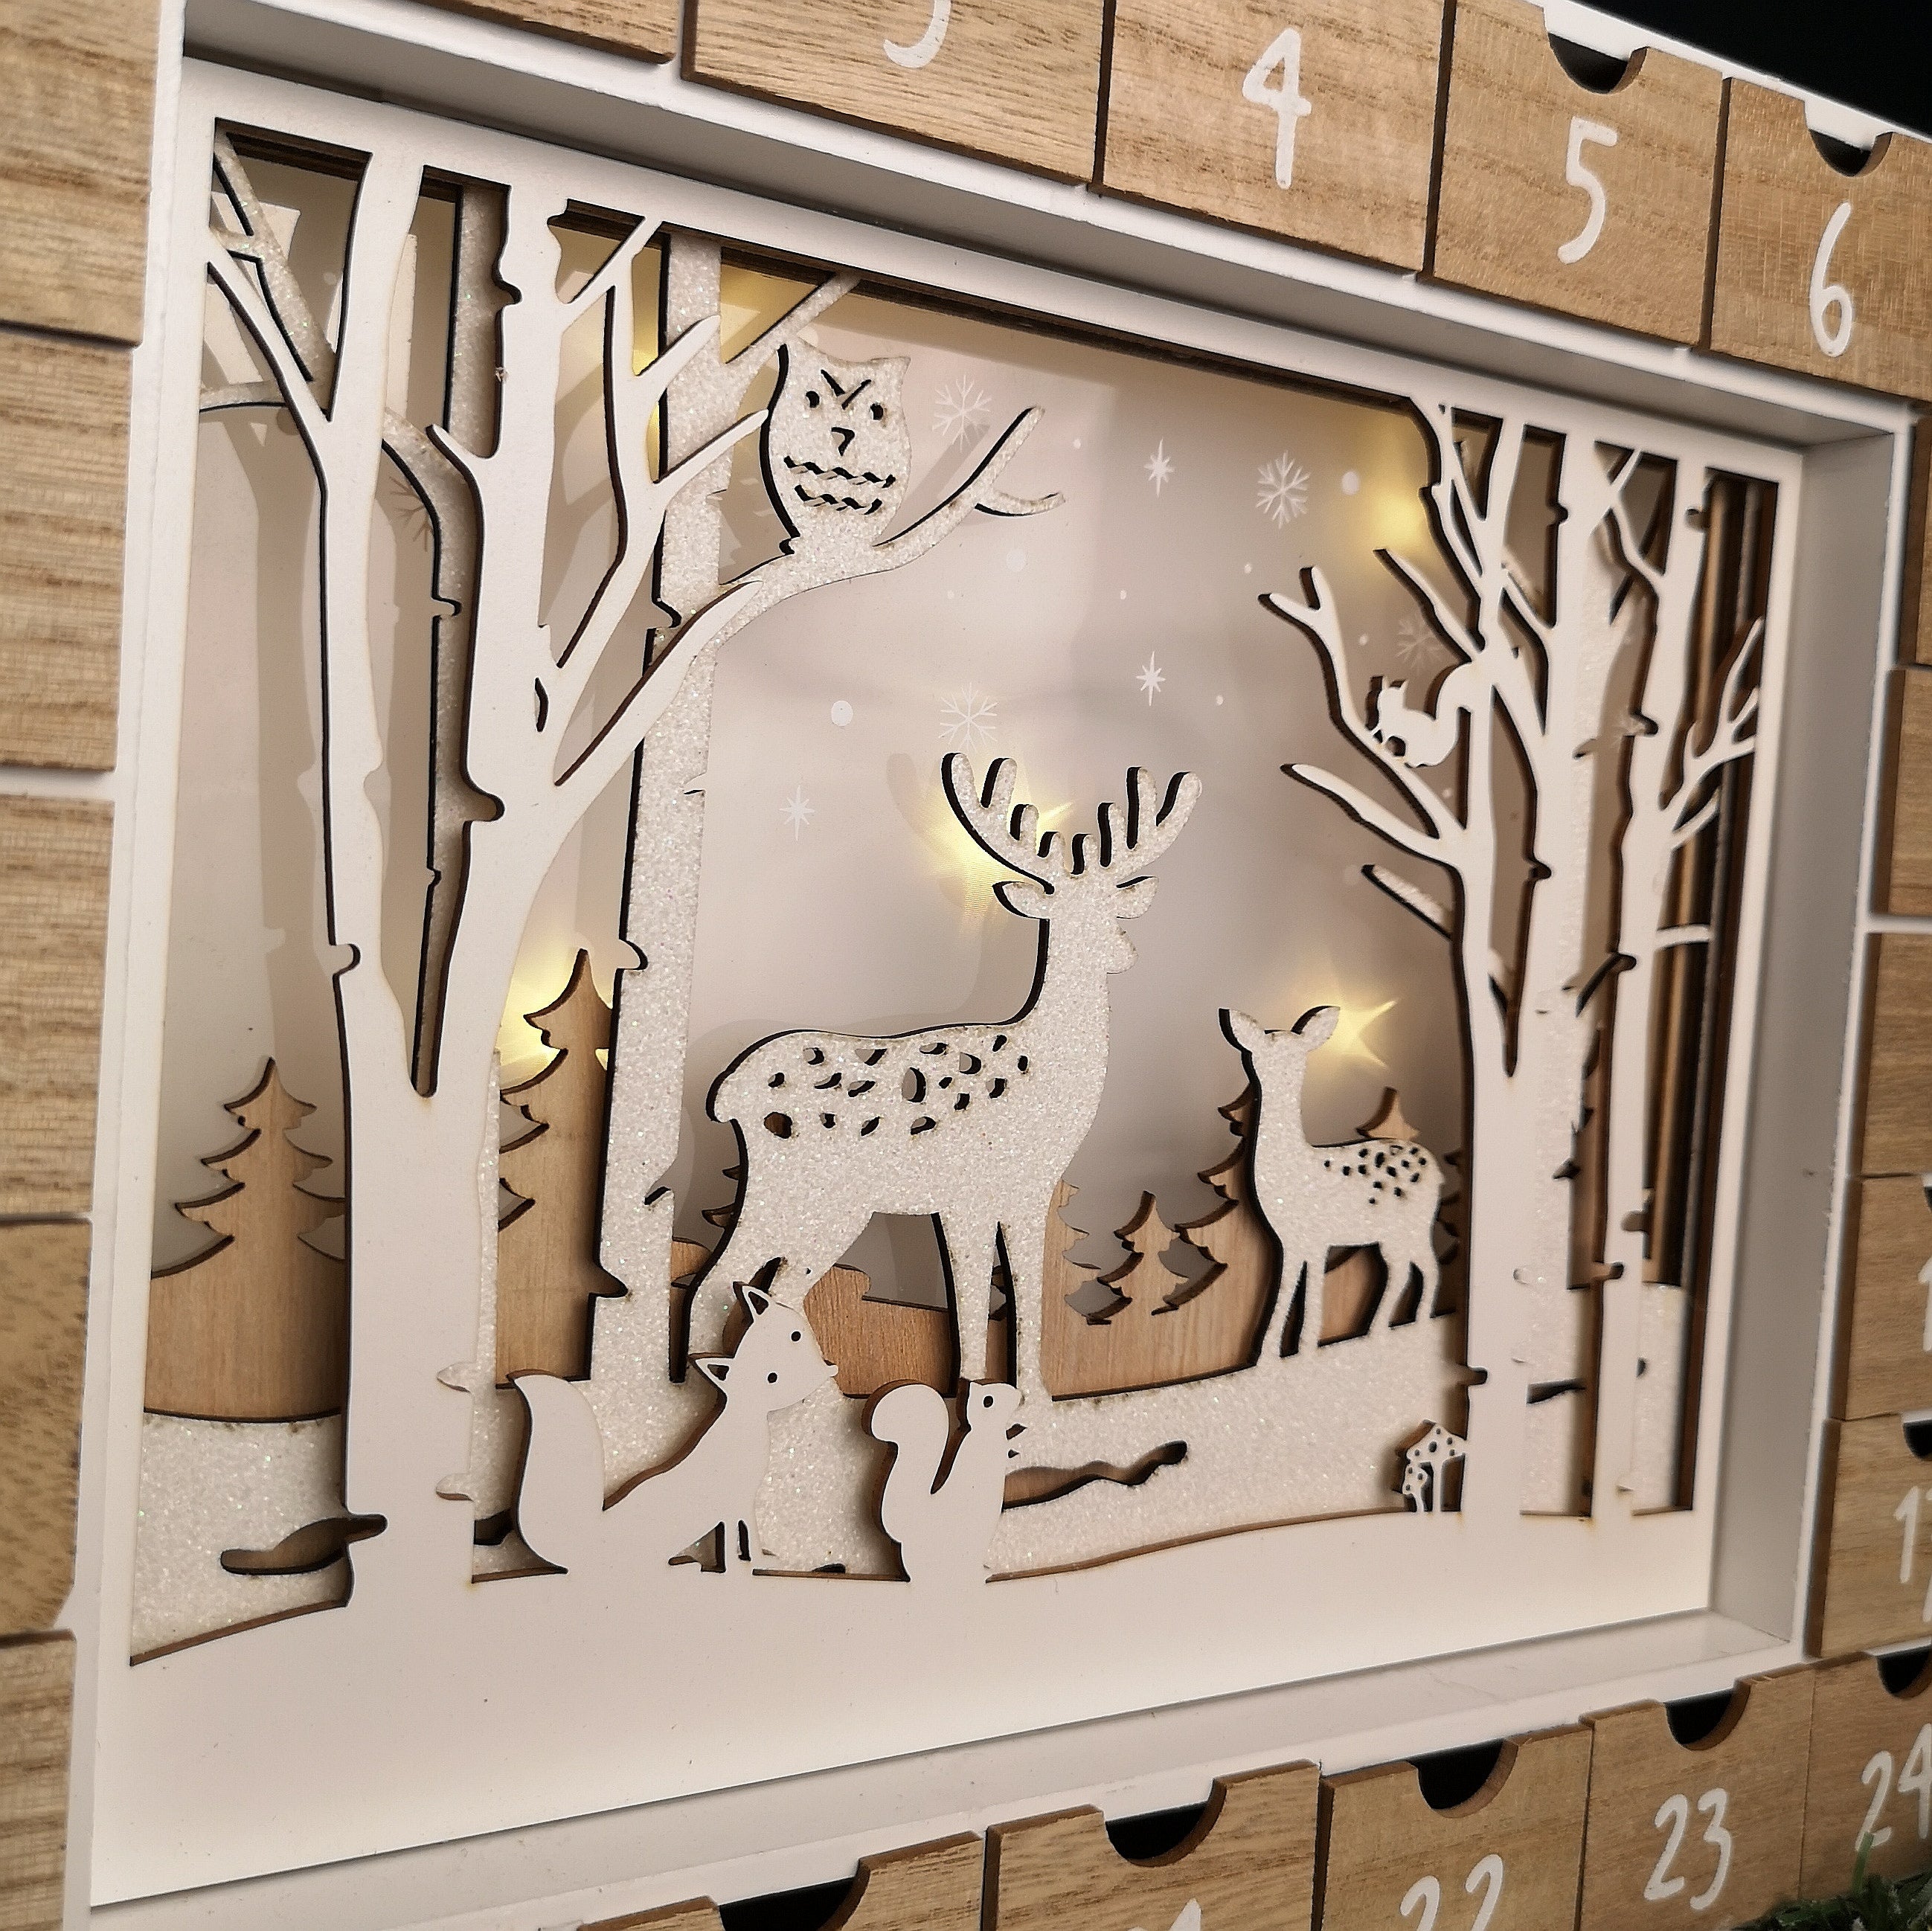 27cm Traditional Wooden Advent Calendar Christmas Decoration with Woodland Animals Winter Scene